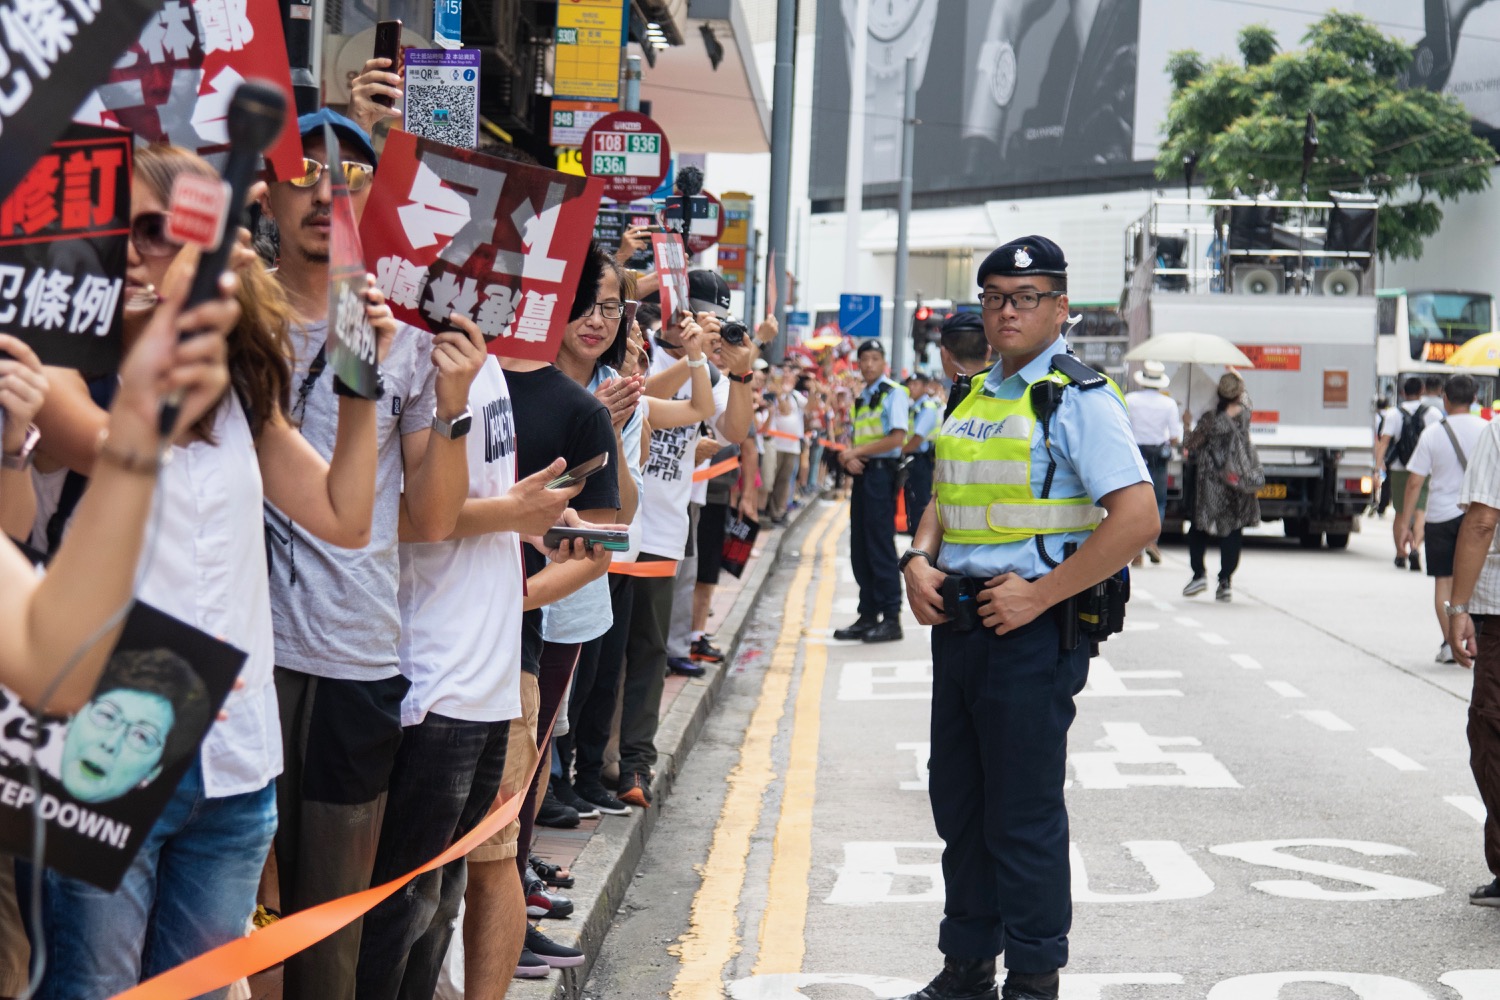 A policeman keeps order as tens of thousands of protesters wend their way through Hong Kong on June 9, 2019. Photo by Samantha Mei Topp.